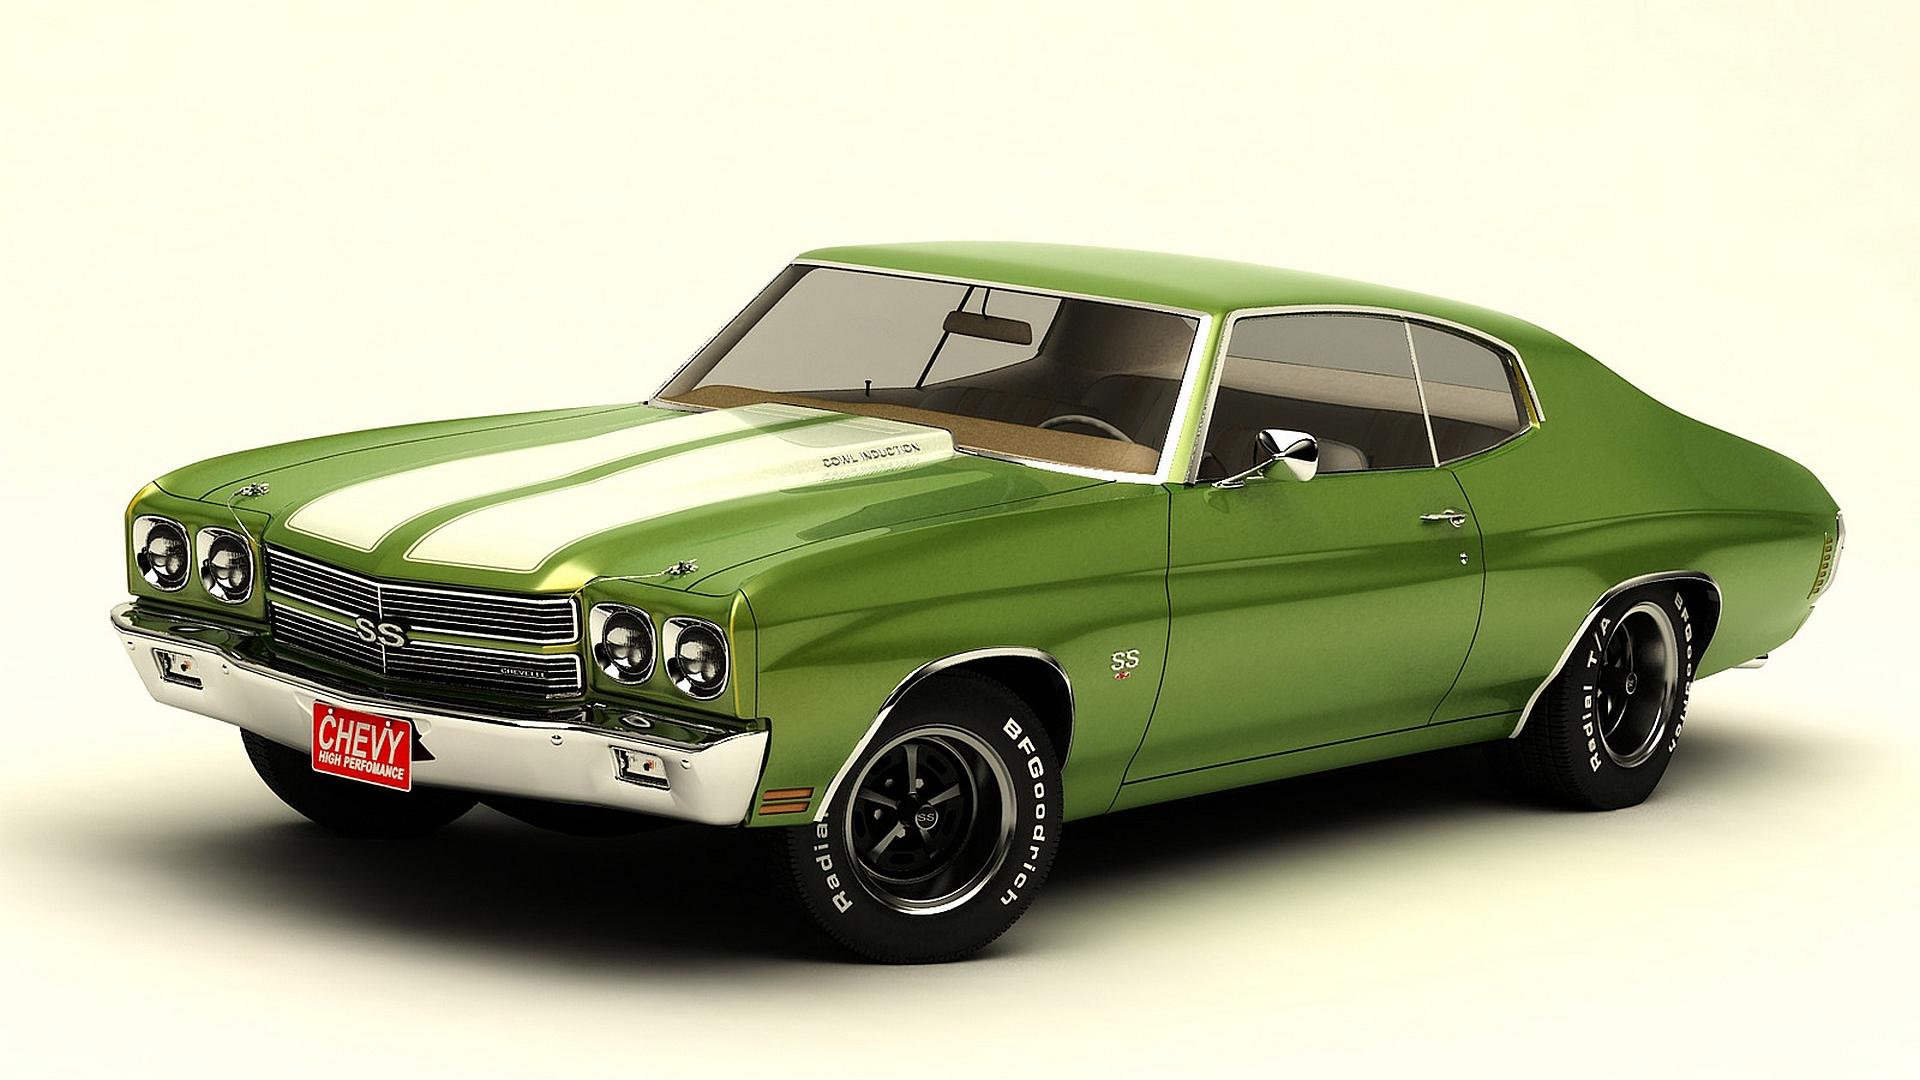 Chevrolet Chevelle Wallpapers HD Download 1920x1080